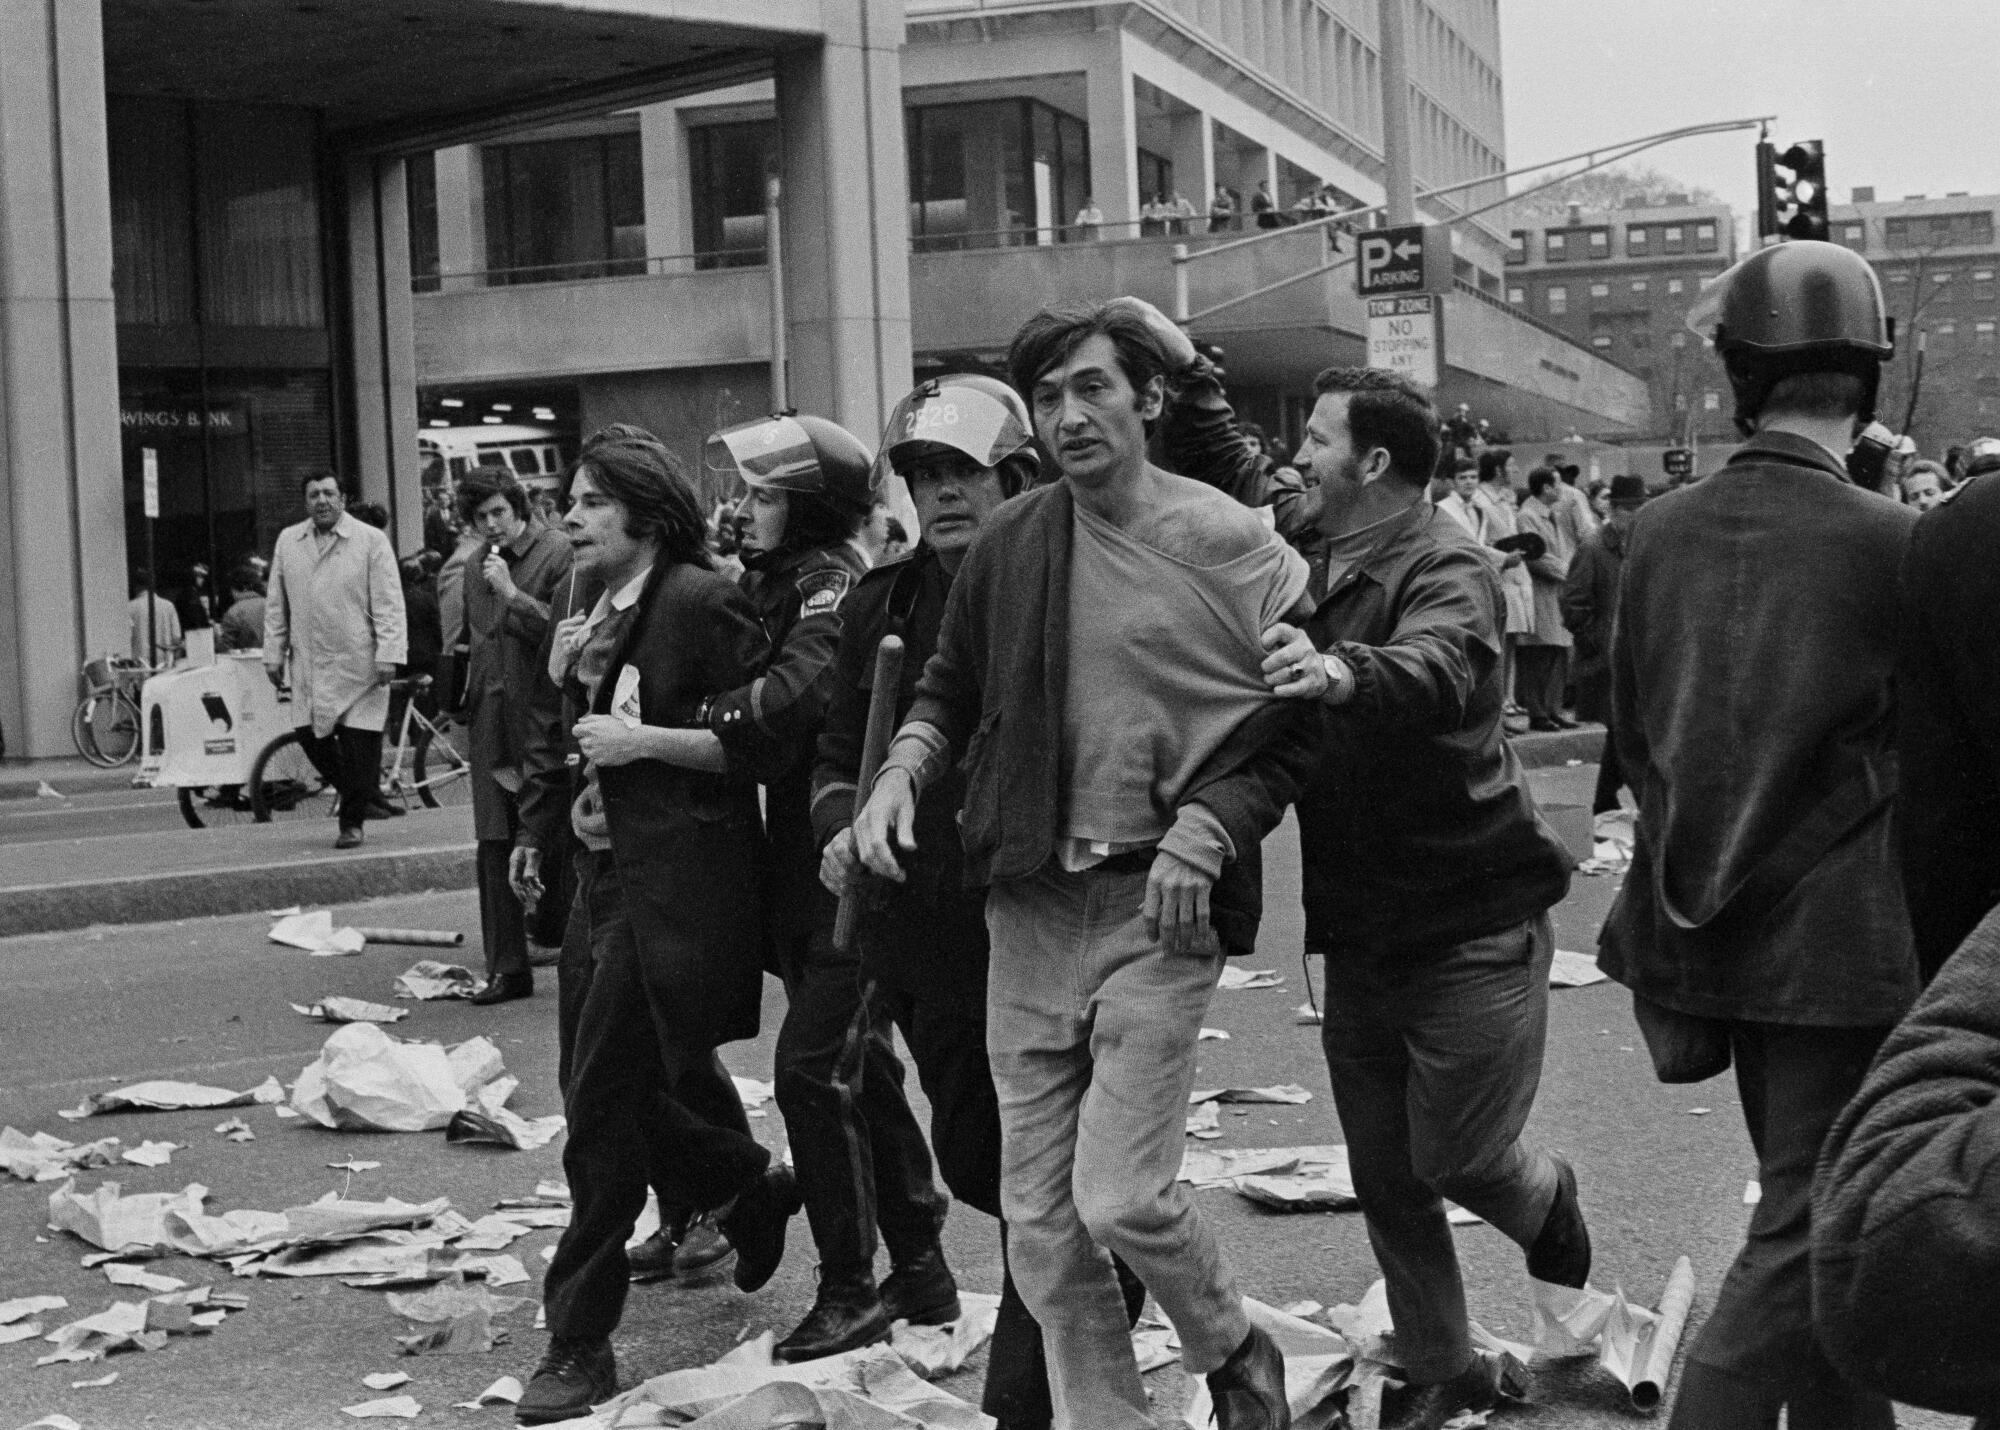 A black-and-white photograph of police leading Howard Zinn and another person away on a street littered with paper